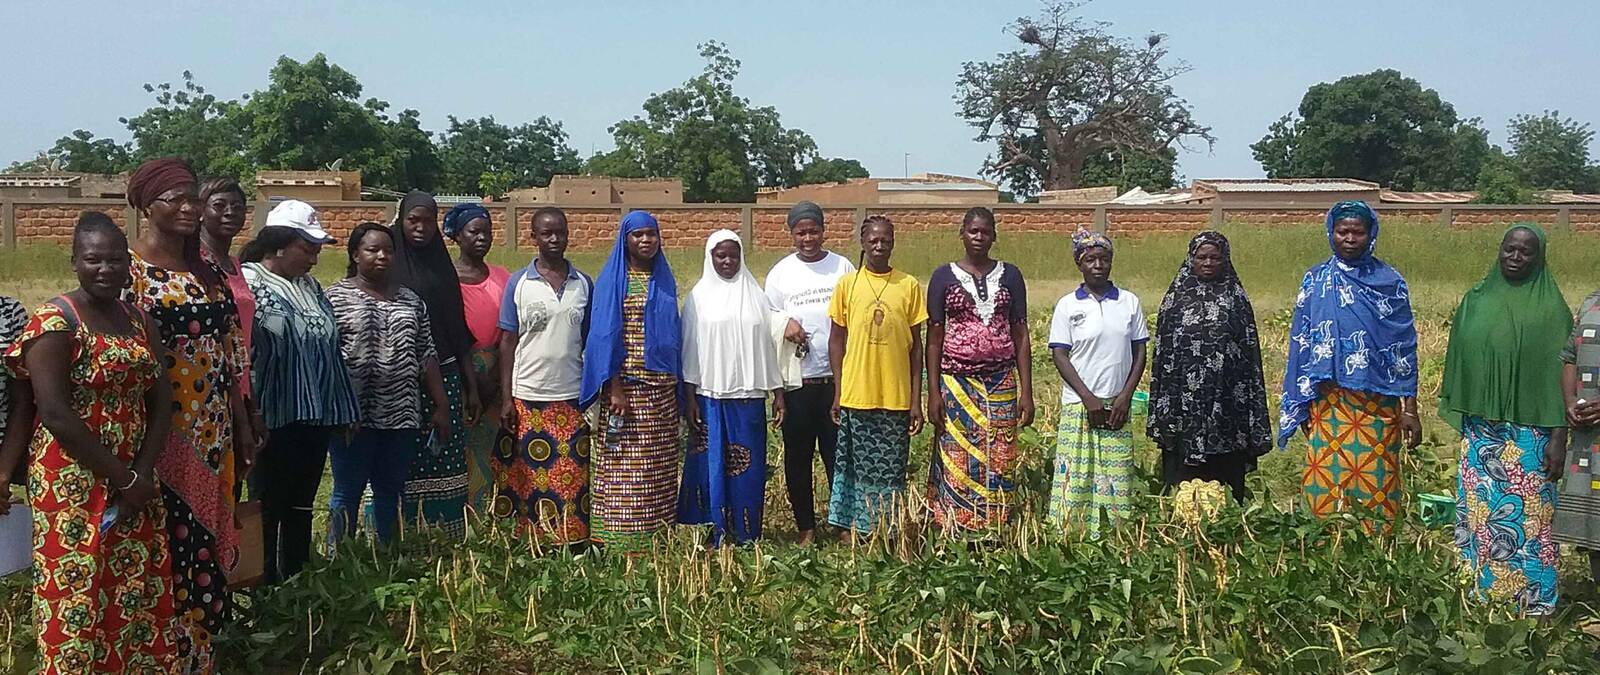 BEYOND GENDER: UNDERSTANDING THE ROLE OF INTERSECTIONALITY ON THE PRODUCTION, MARKETING, AND CONSUMPTION OF COWPEA IN BURKINA FASO